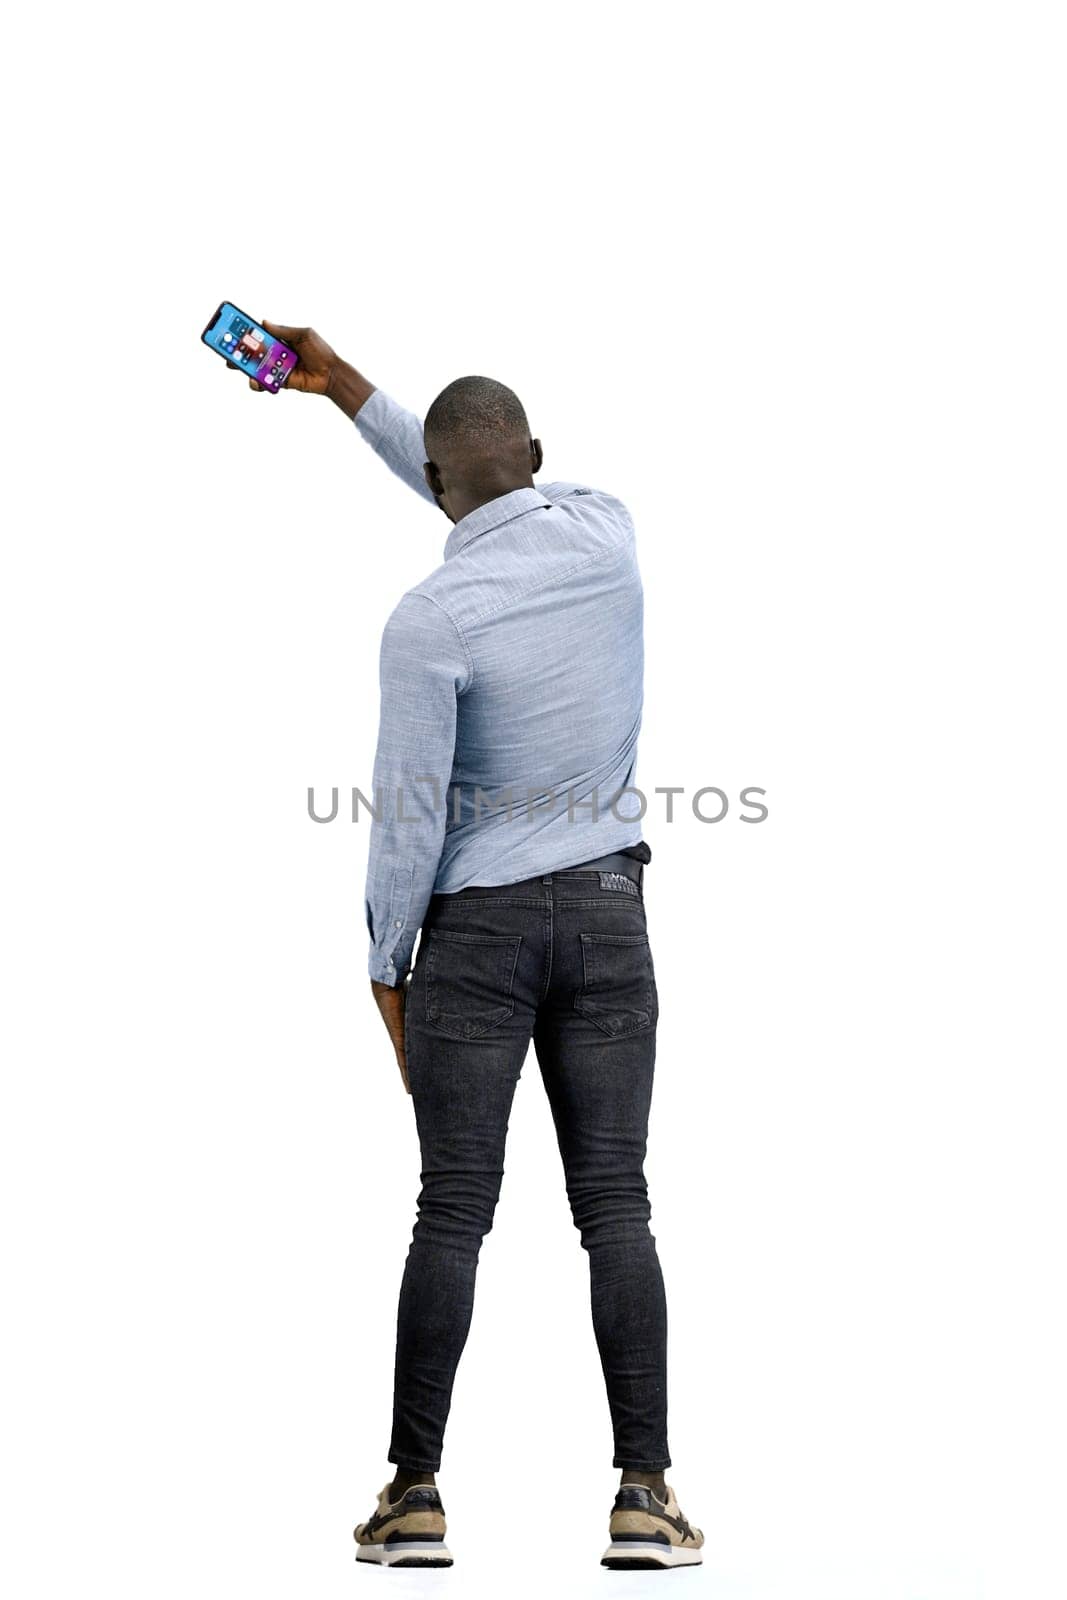 A man, full-length, on a white background, waving his phone.